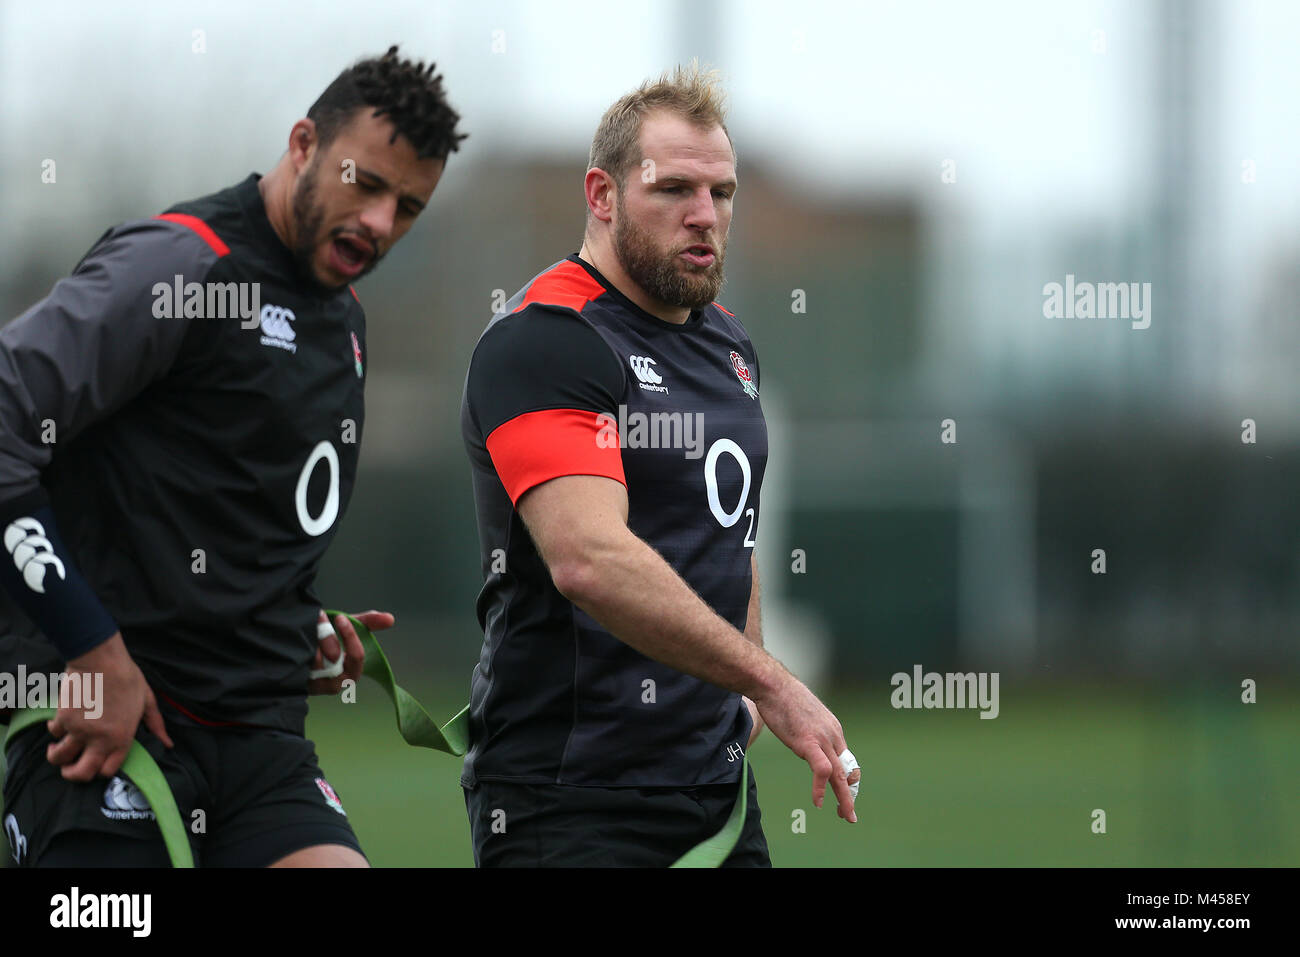 England's James Haskell during the training session at Latymer Upper School, London. PRESS ASSOCIATION Photo. Picture date: Wednesday February 14, 2018. See PA story RUGBYU England. Photo credit should read: Steven Paston/PA Wire. . Stock Photo